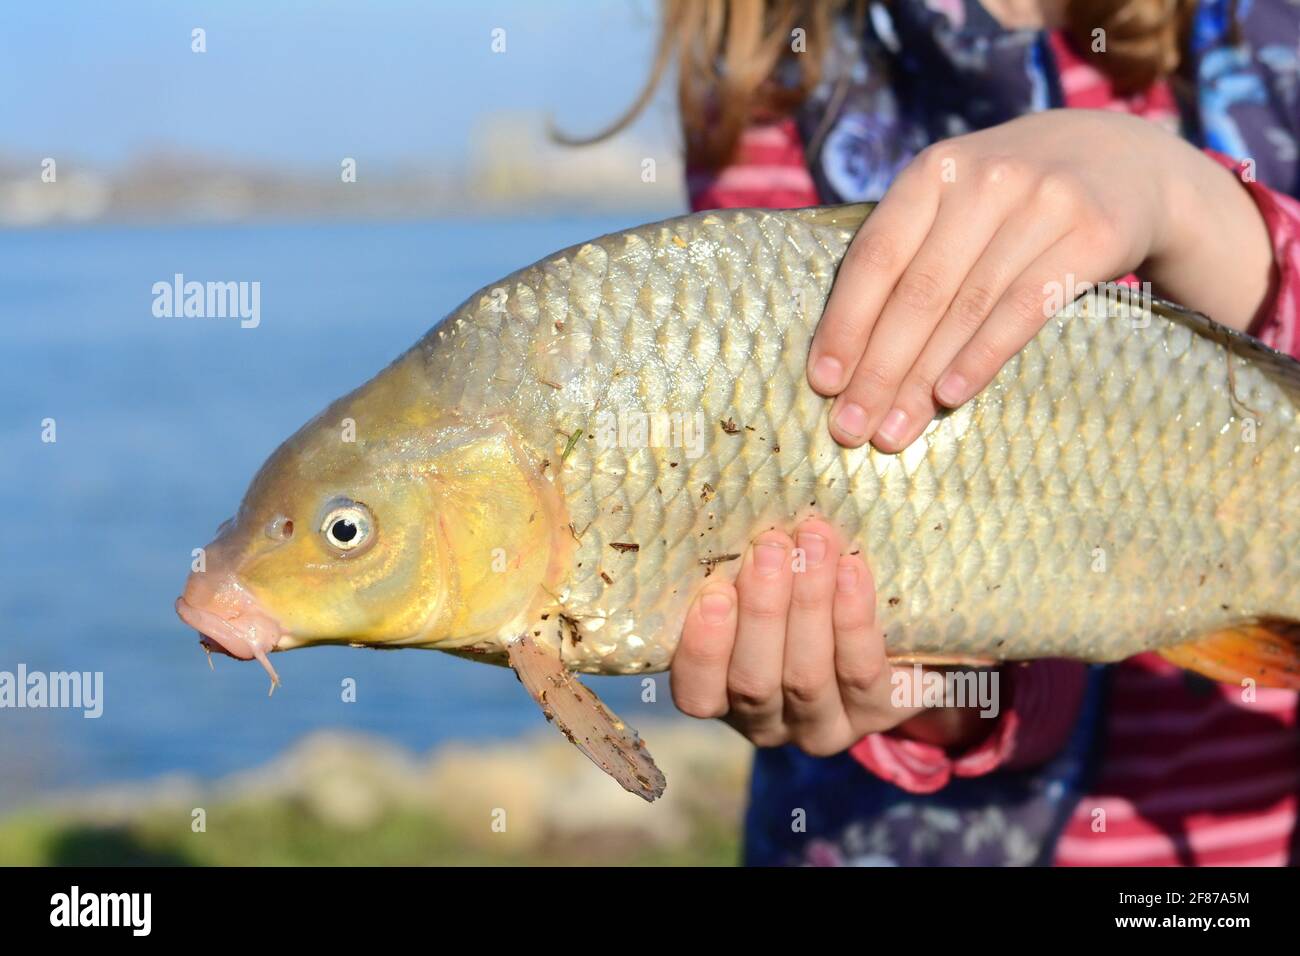 the girl's hands hold the carp fish Stock Photo - Alamy